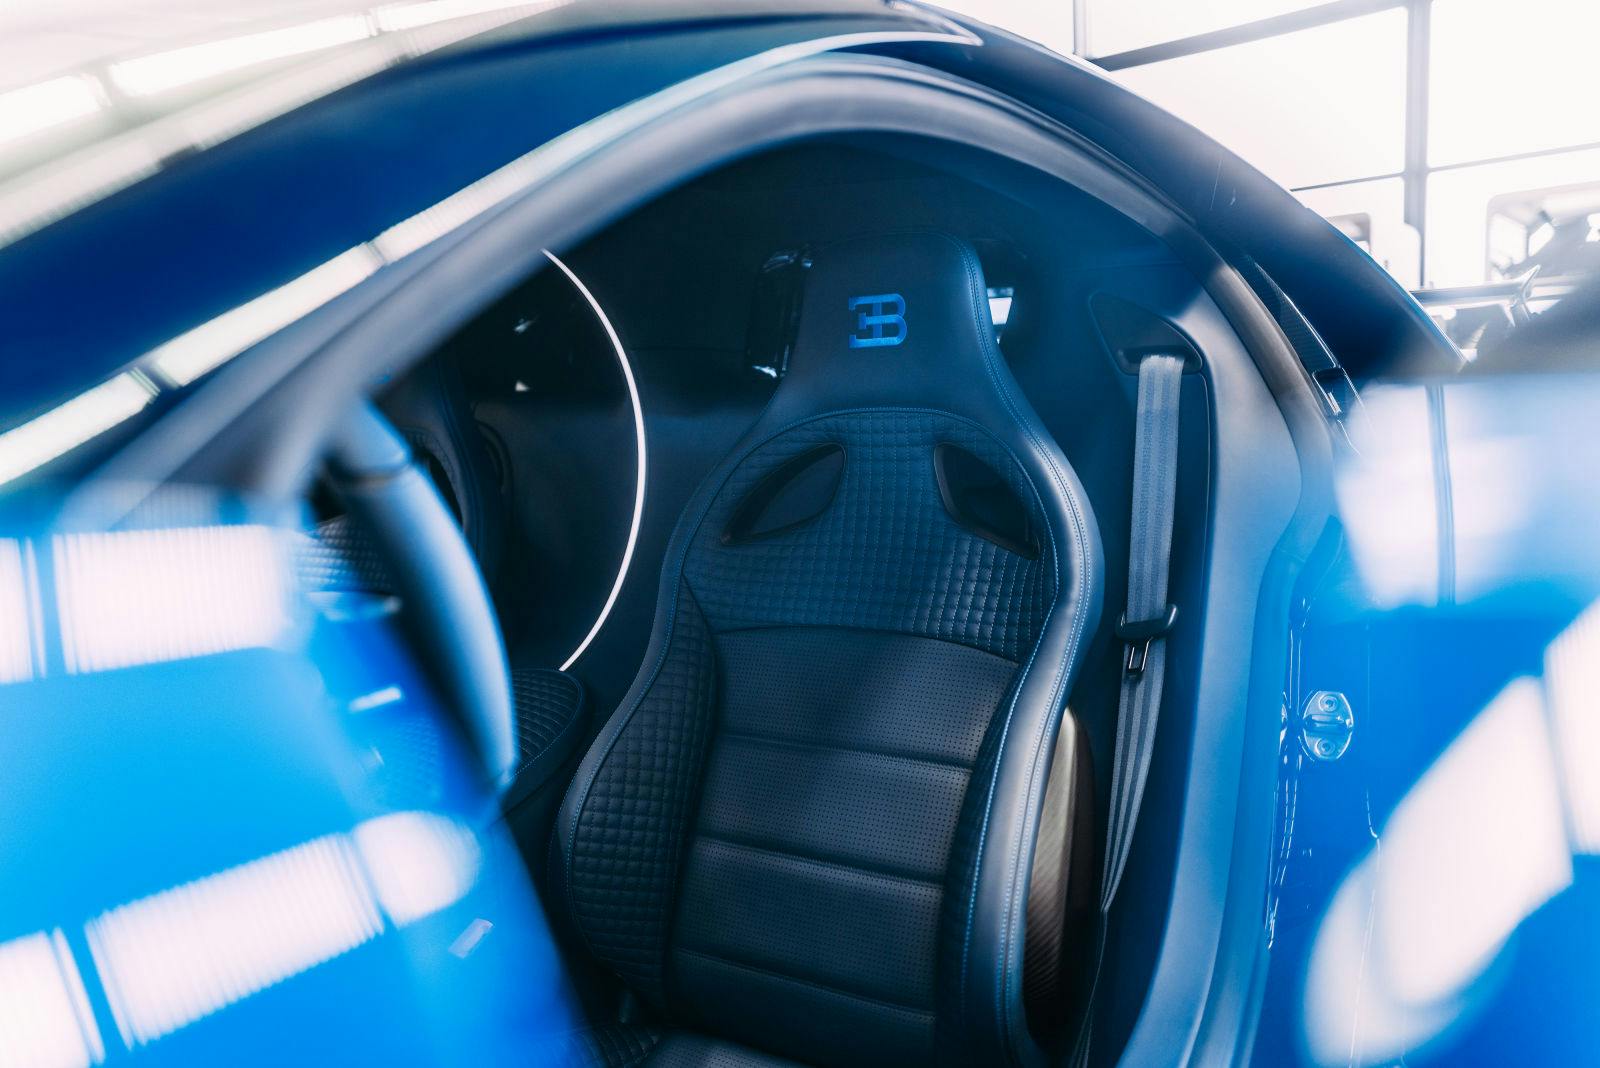 The Centodieci sport seats are adorned with finely quilted leather.